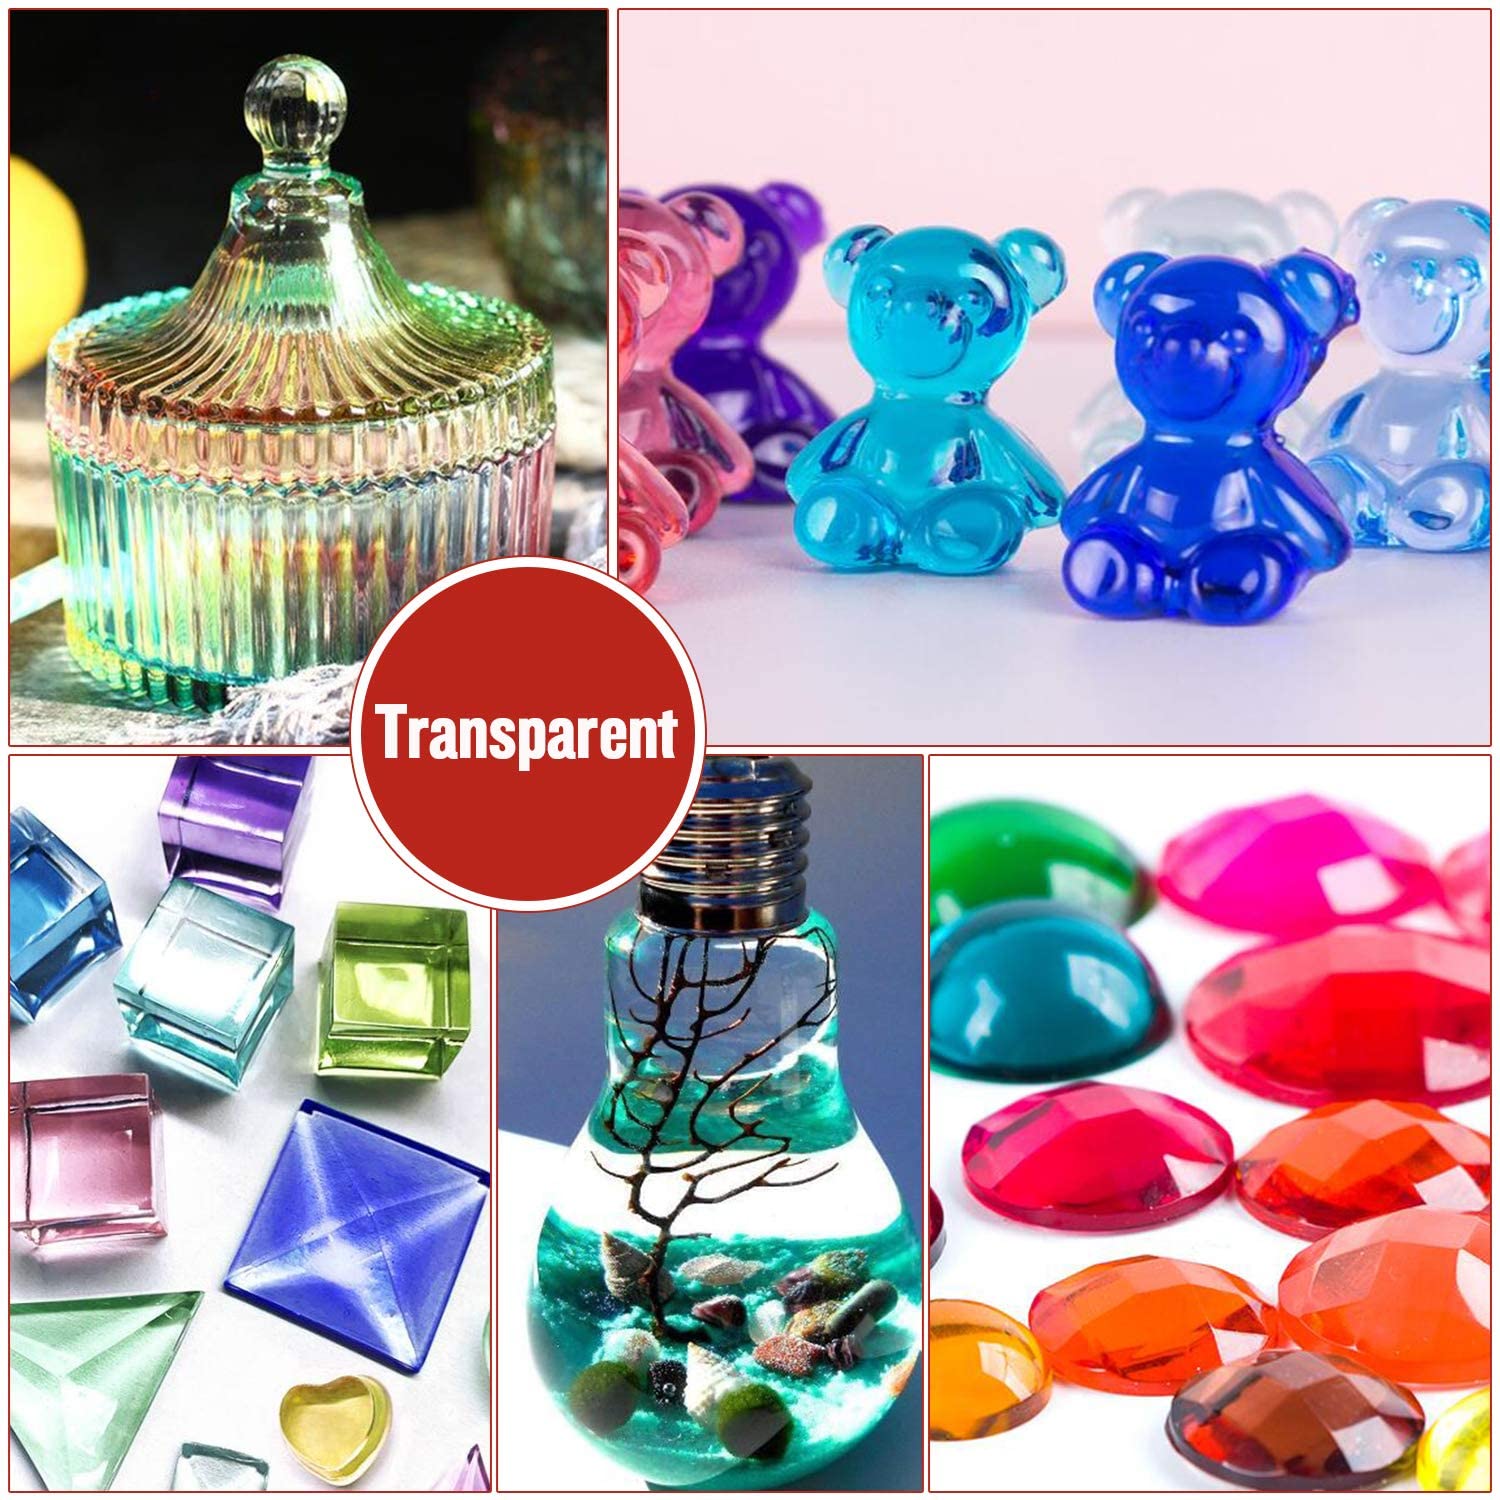 New Popular 24 Colors Transparent Non-Toxic UV Epoxy Resin Dye Liquid for UV Resin Coloring, Resin Jewelry Making - Concentrated UV Resin Colorant for Art, Paint, Crafts - 0.35oz Each